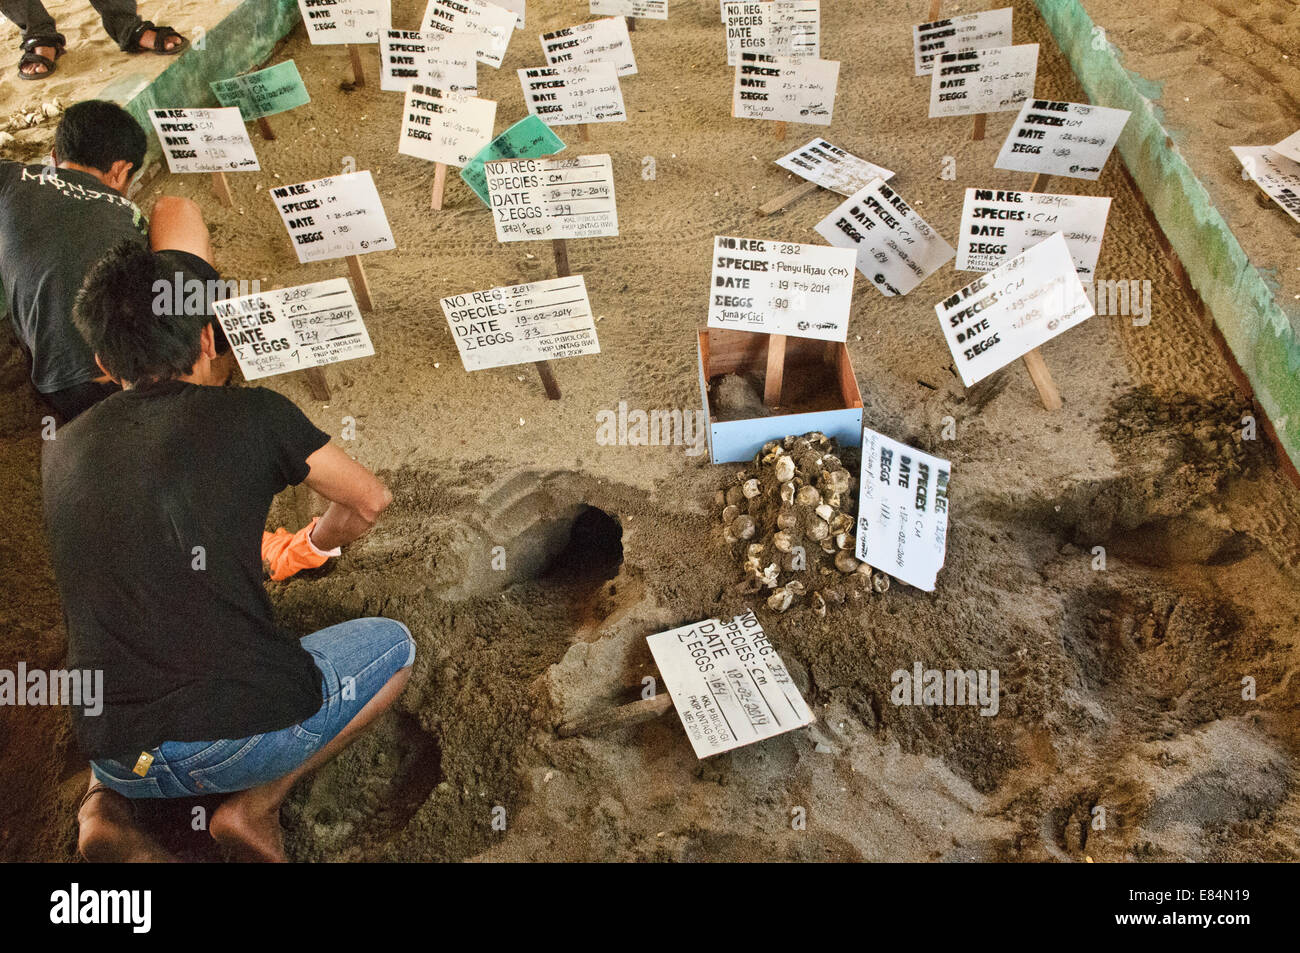 Rangers digging and collecting green turtle eggs at the Meru Betiri National Park, Sukamade, East Java, Indonesia Stock Photo